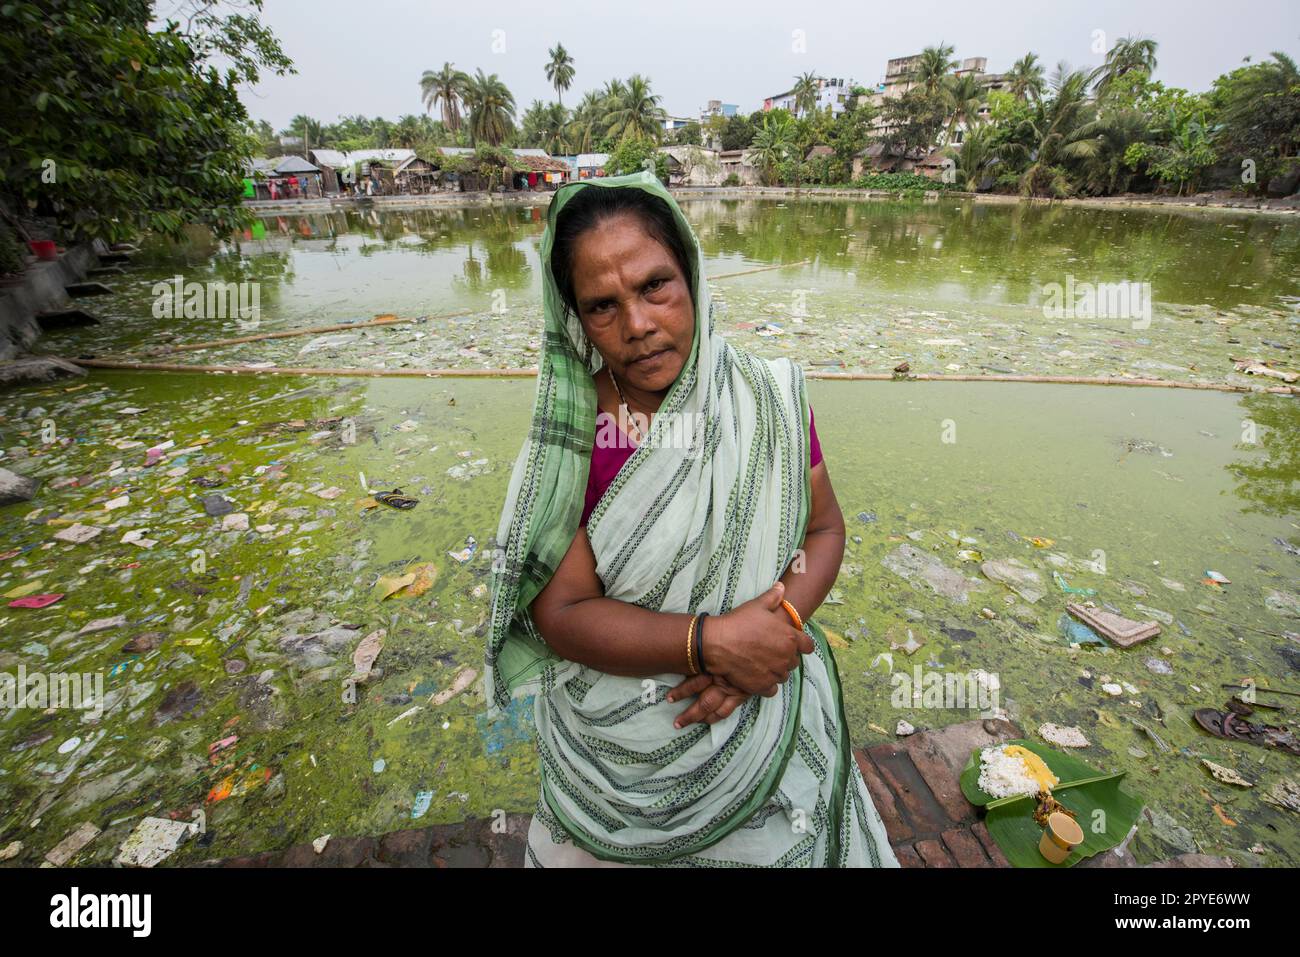 Bangladesh, Khulna, Sonadanga. A woman who lives in the slums of Bangladesh. March 18, 2017. Editorial use only. Stock Photo